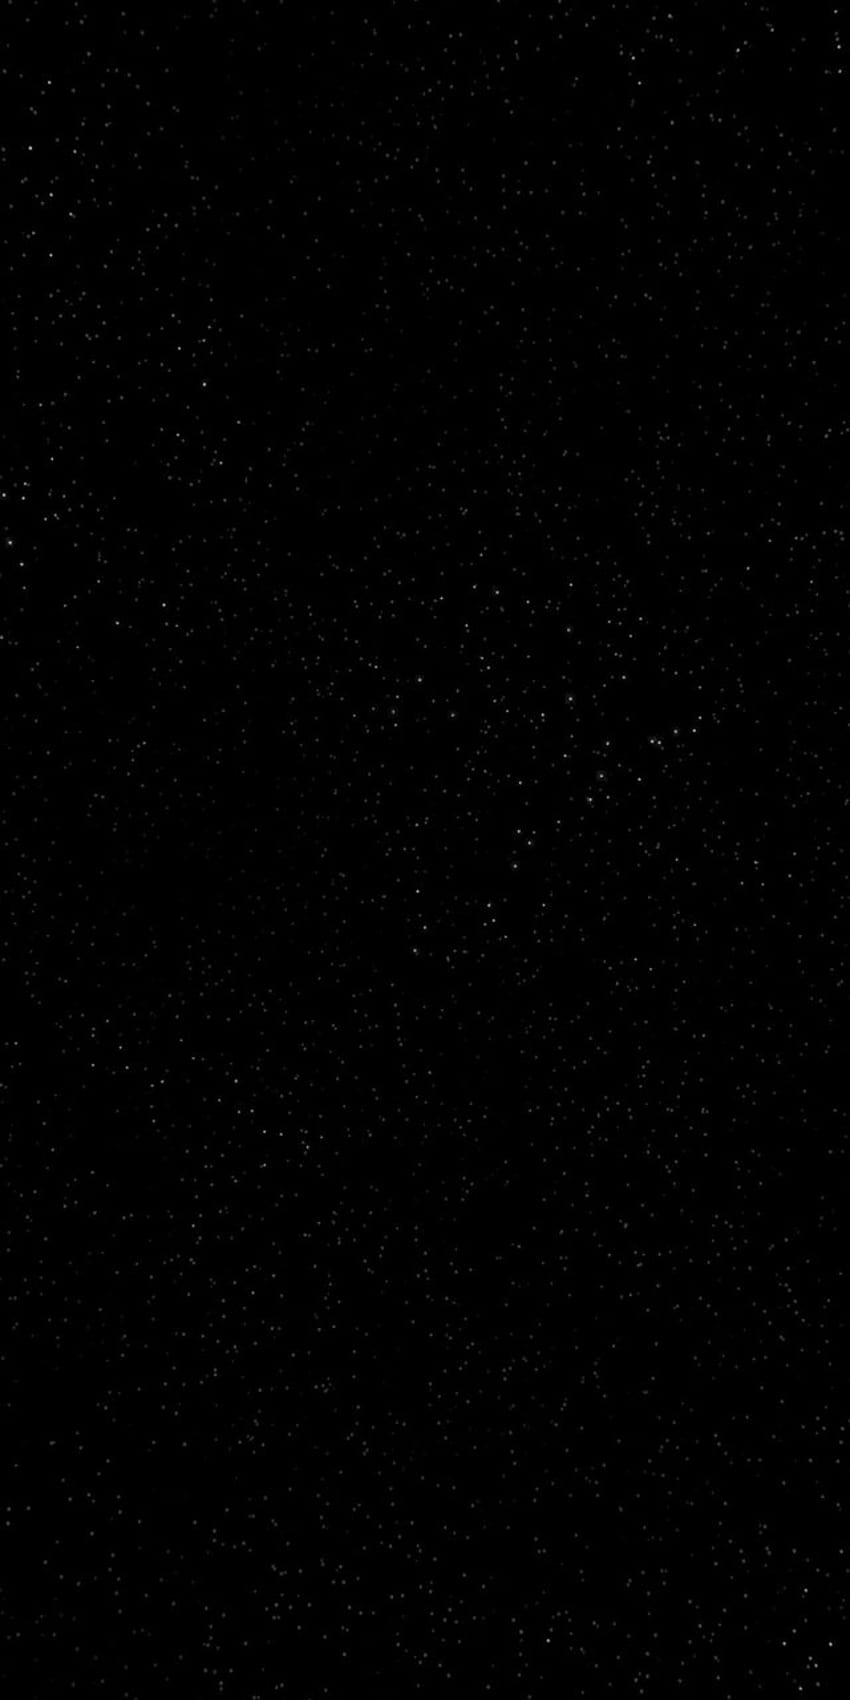 So I wanted a black for my iPhone X but found true black too boring. This is what I found. I think it's by far the cleanest and best looking star, amazing black HD phone wallpaper